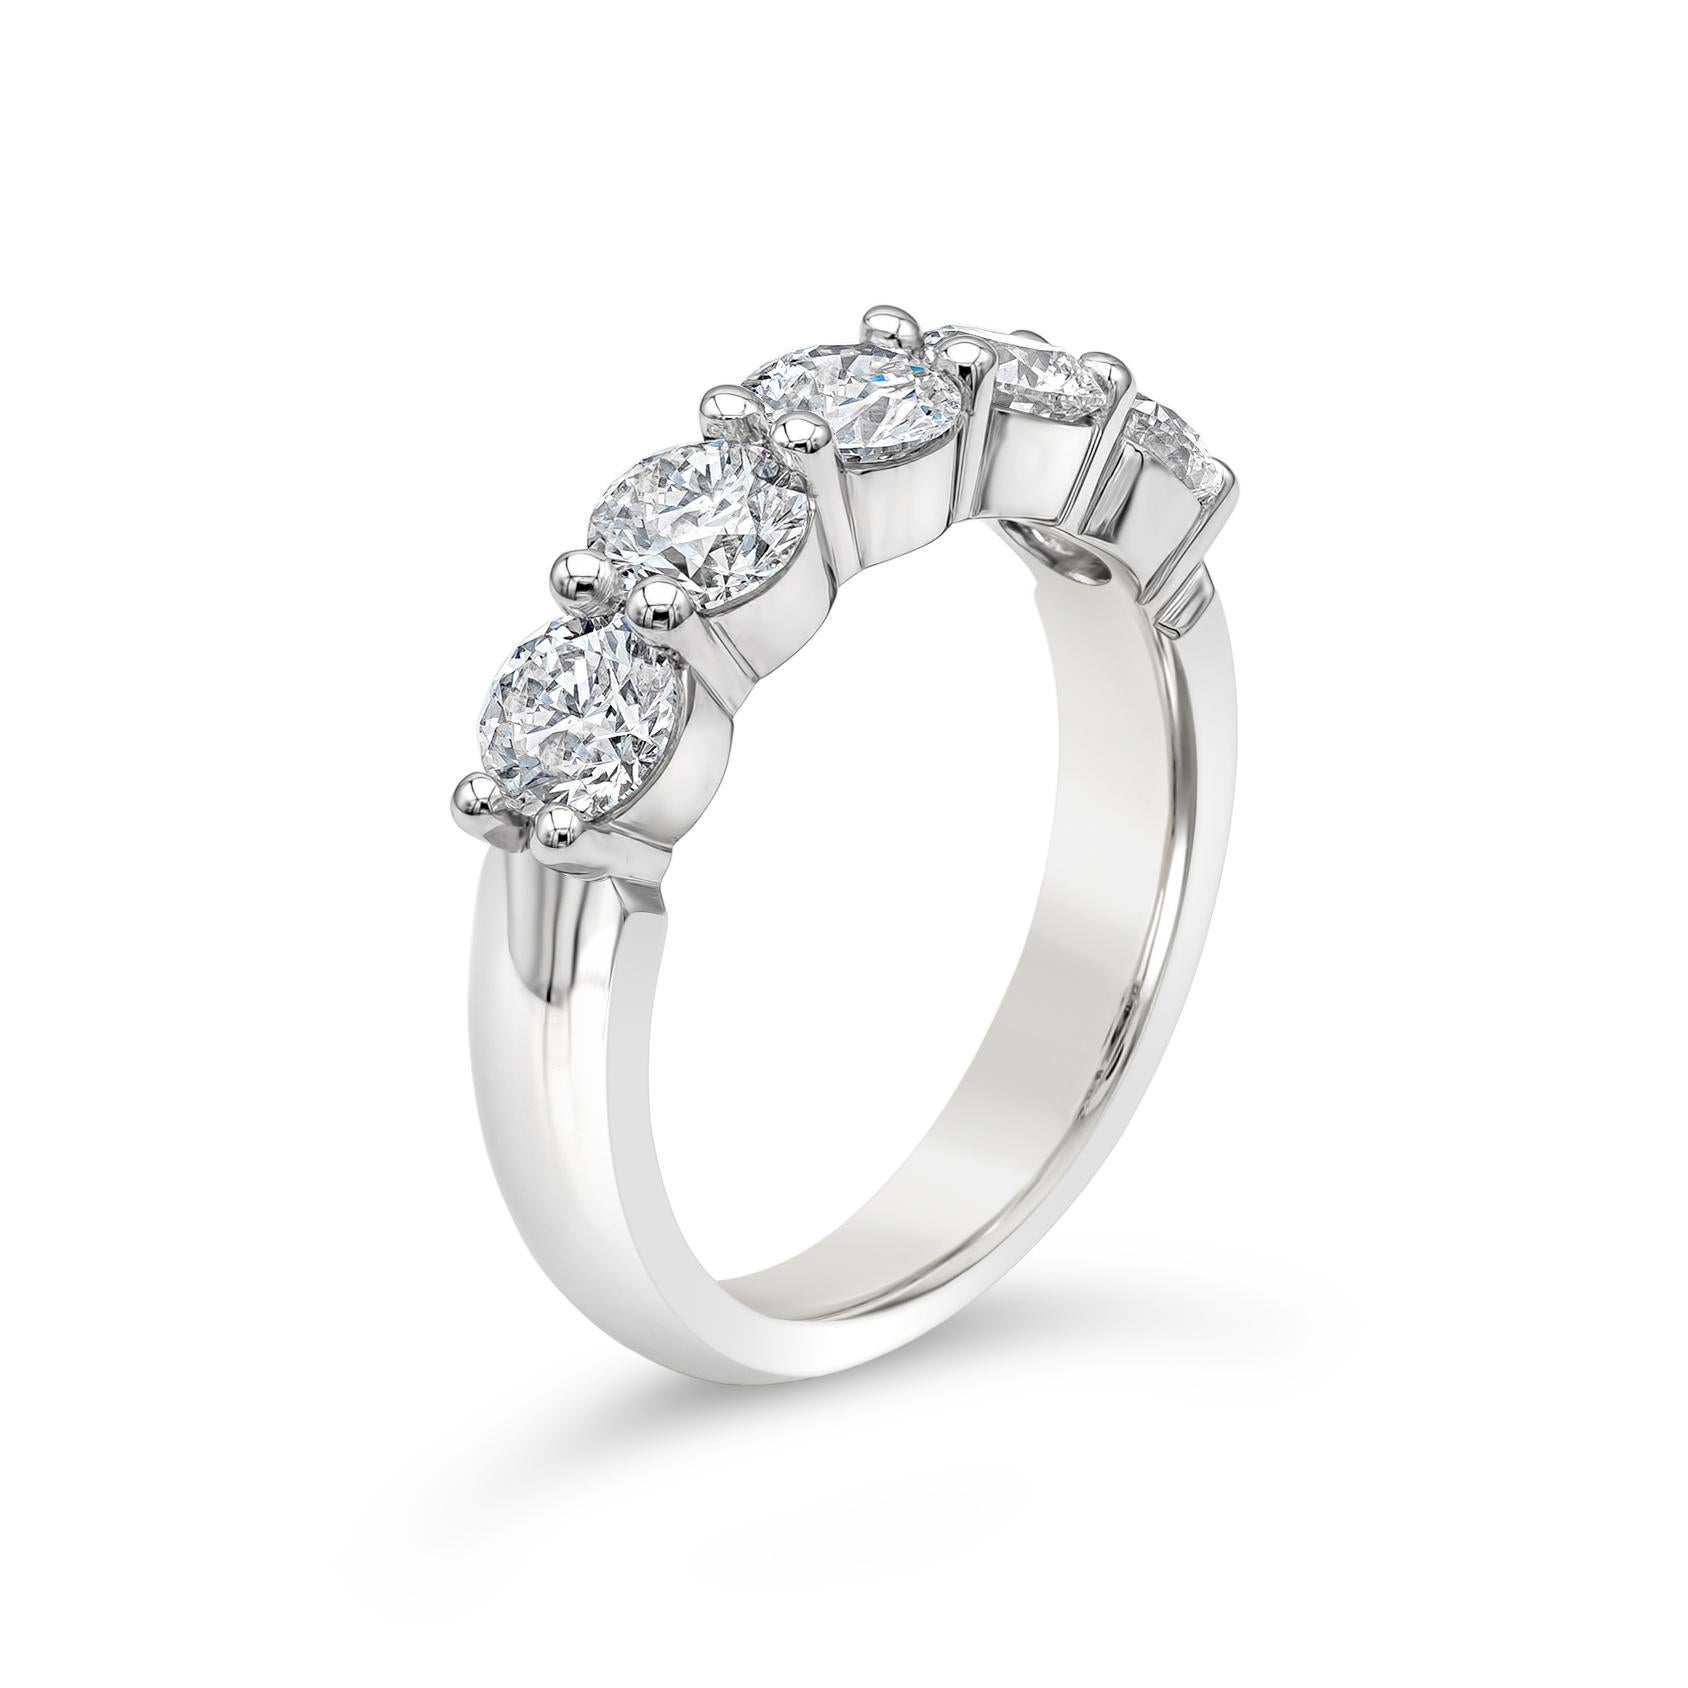 A classic wedding band style showcasing five stones of round brilliant diamonds weighing 1.72 carats total, F Color and SI in Clarity. Set in a shared-prong setting, Made with Platinum Size 6.5 US

Style available in different price ranges. Prices